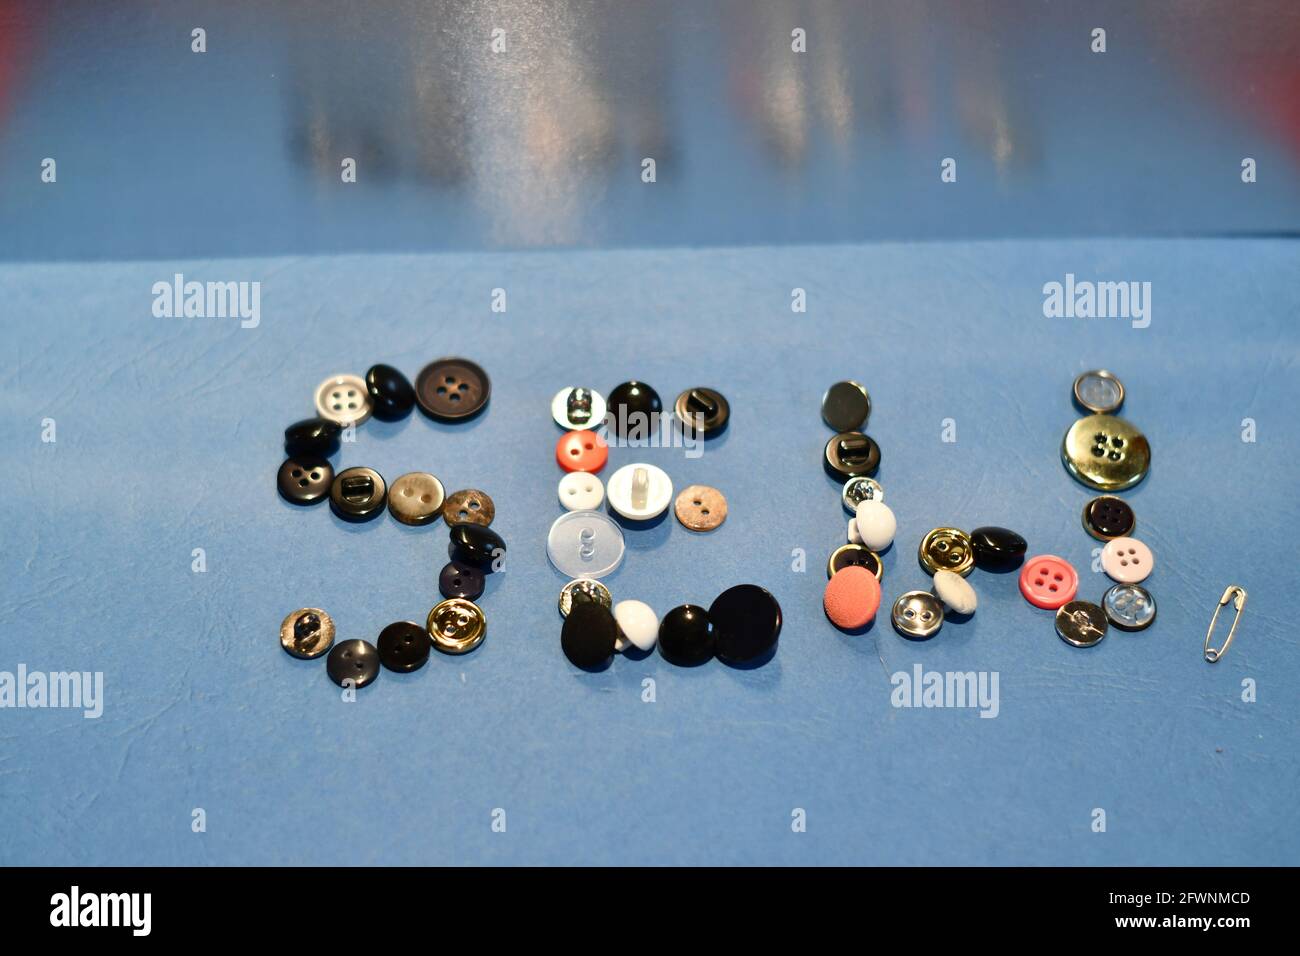 sew letters in an array of clothes buttons on a blue back ground with a safety pin Stock Photo